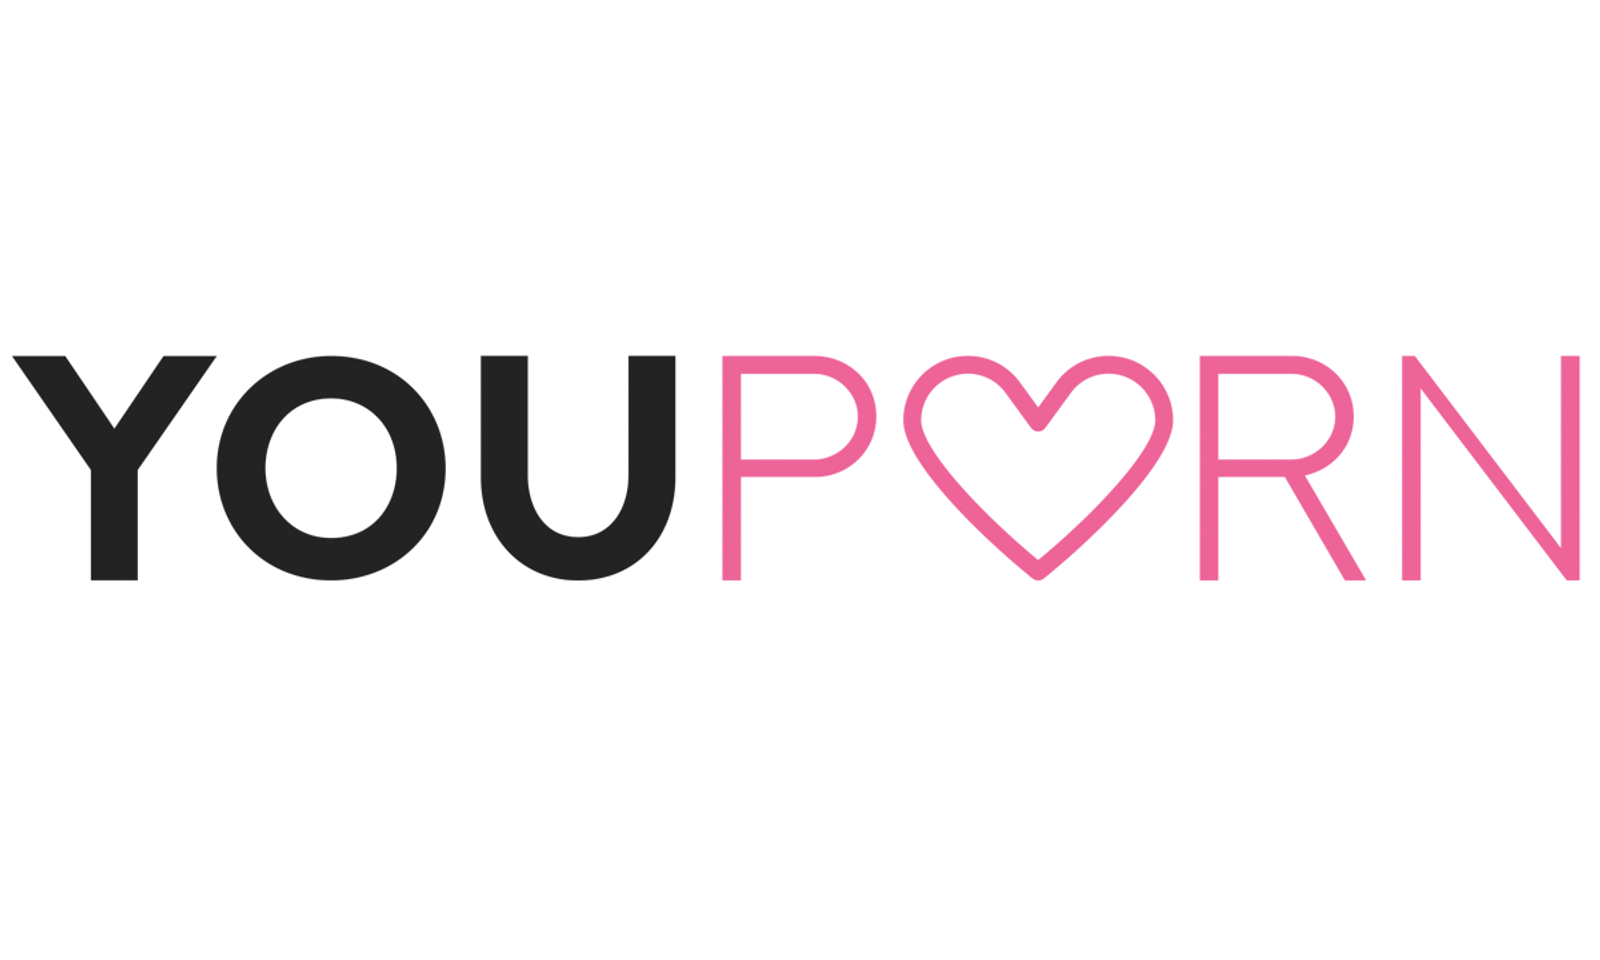 YouPorn Donates $50,000 to Support COVID-19 Relief Efforts